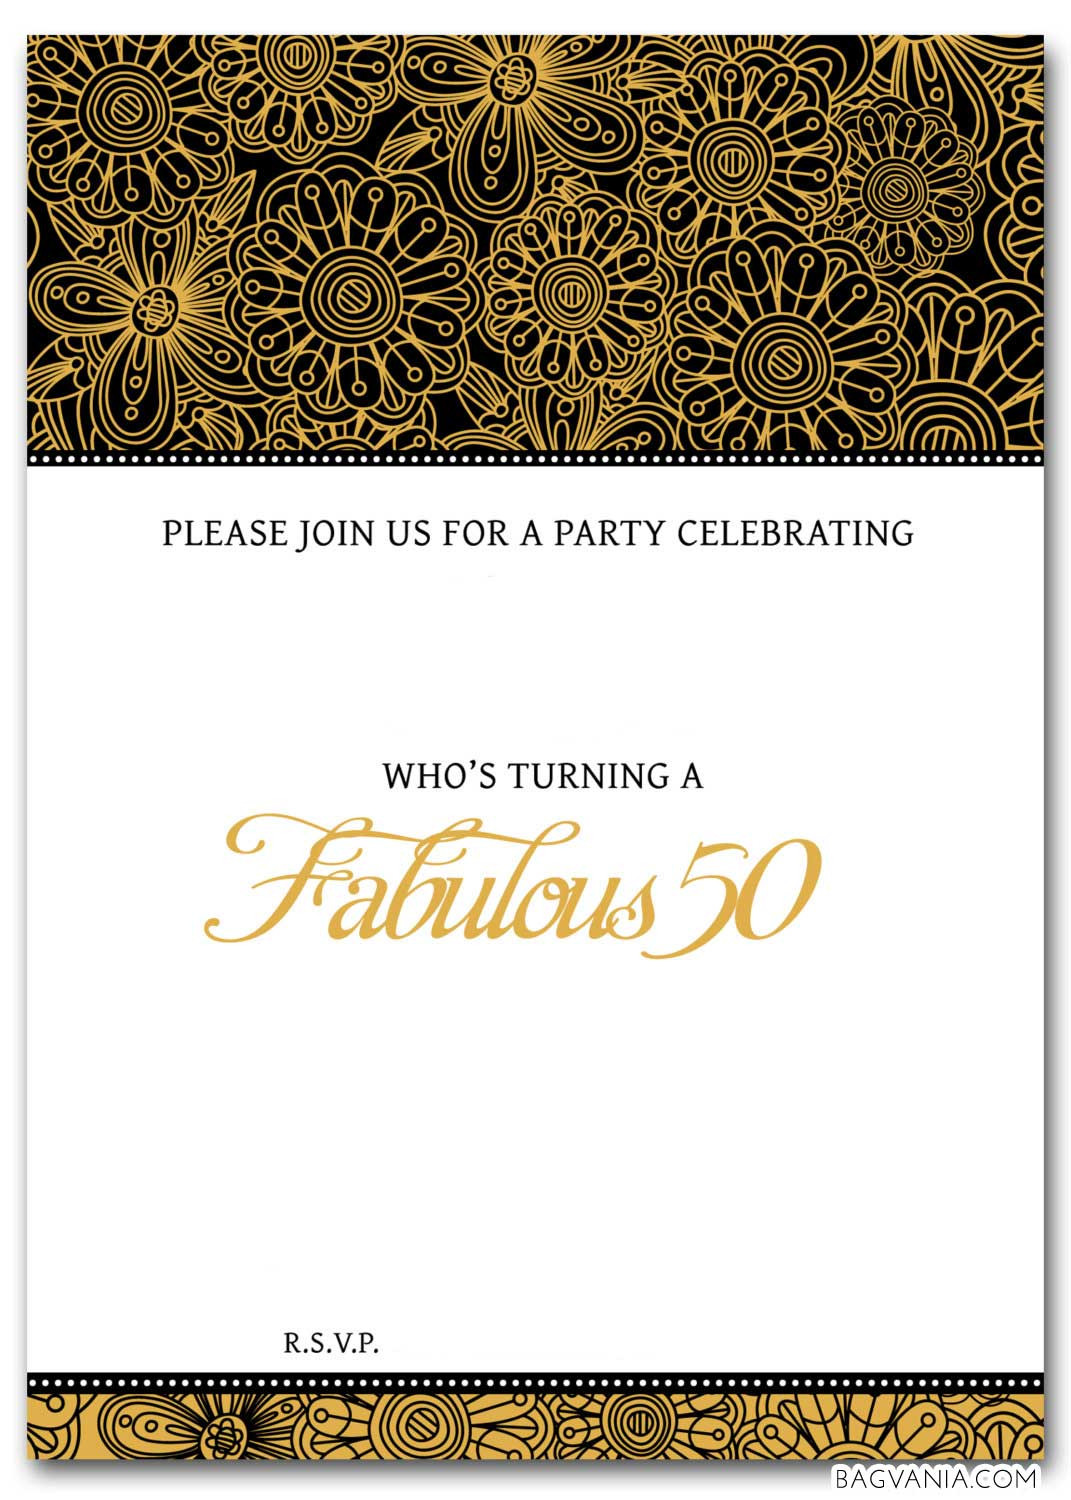 Birthday Party Invitations Template
 FREE 50th Birthday Party Invitations Wording – FREE